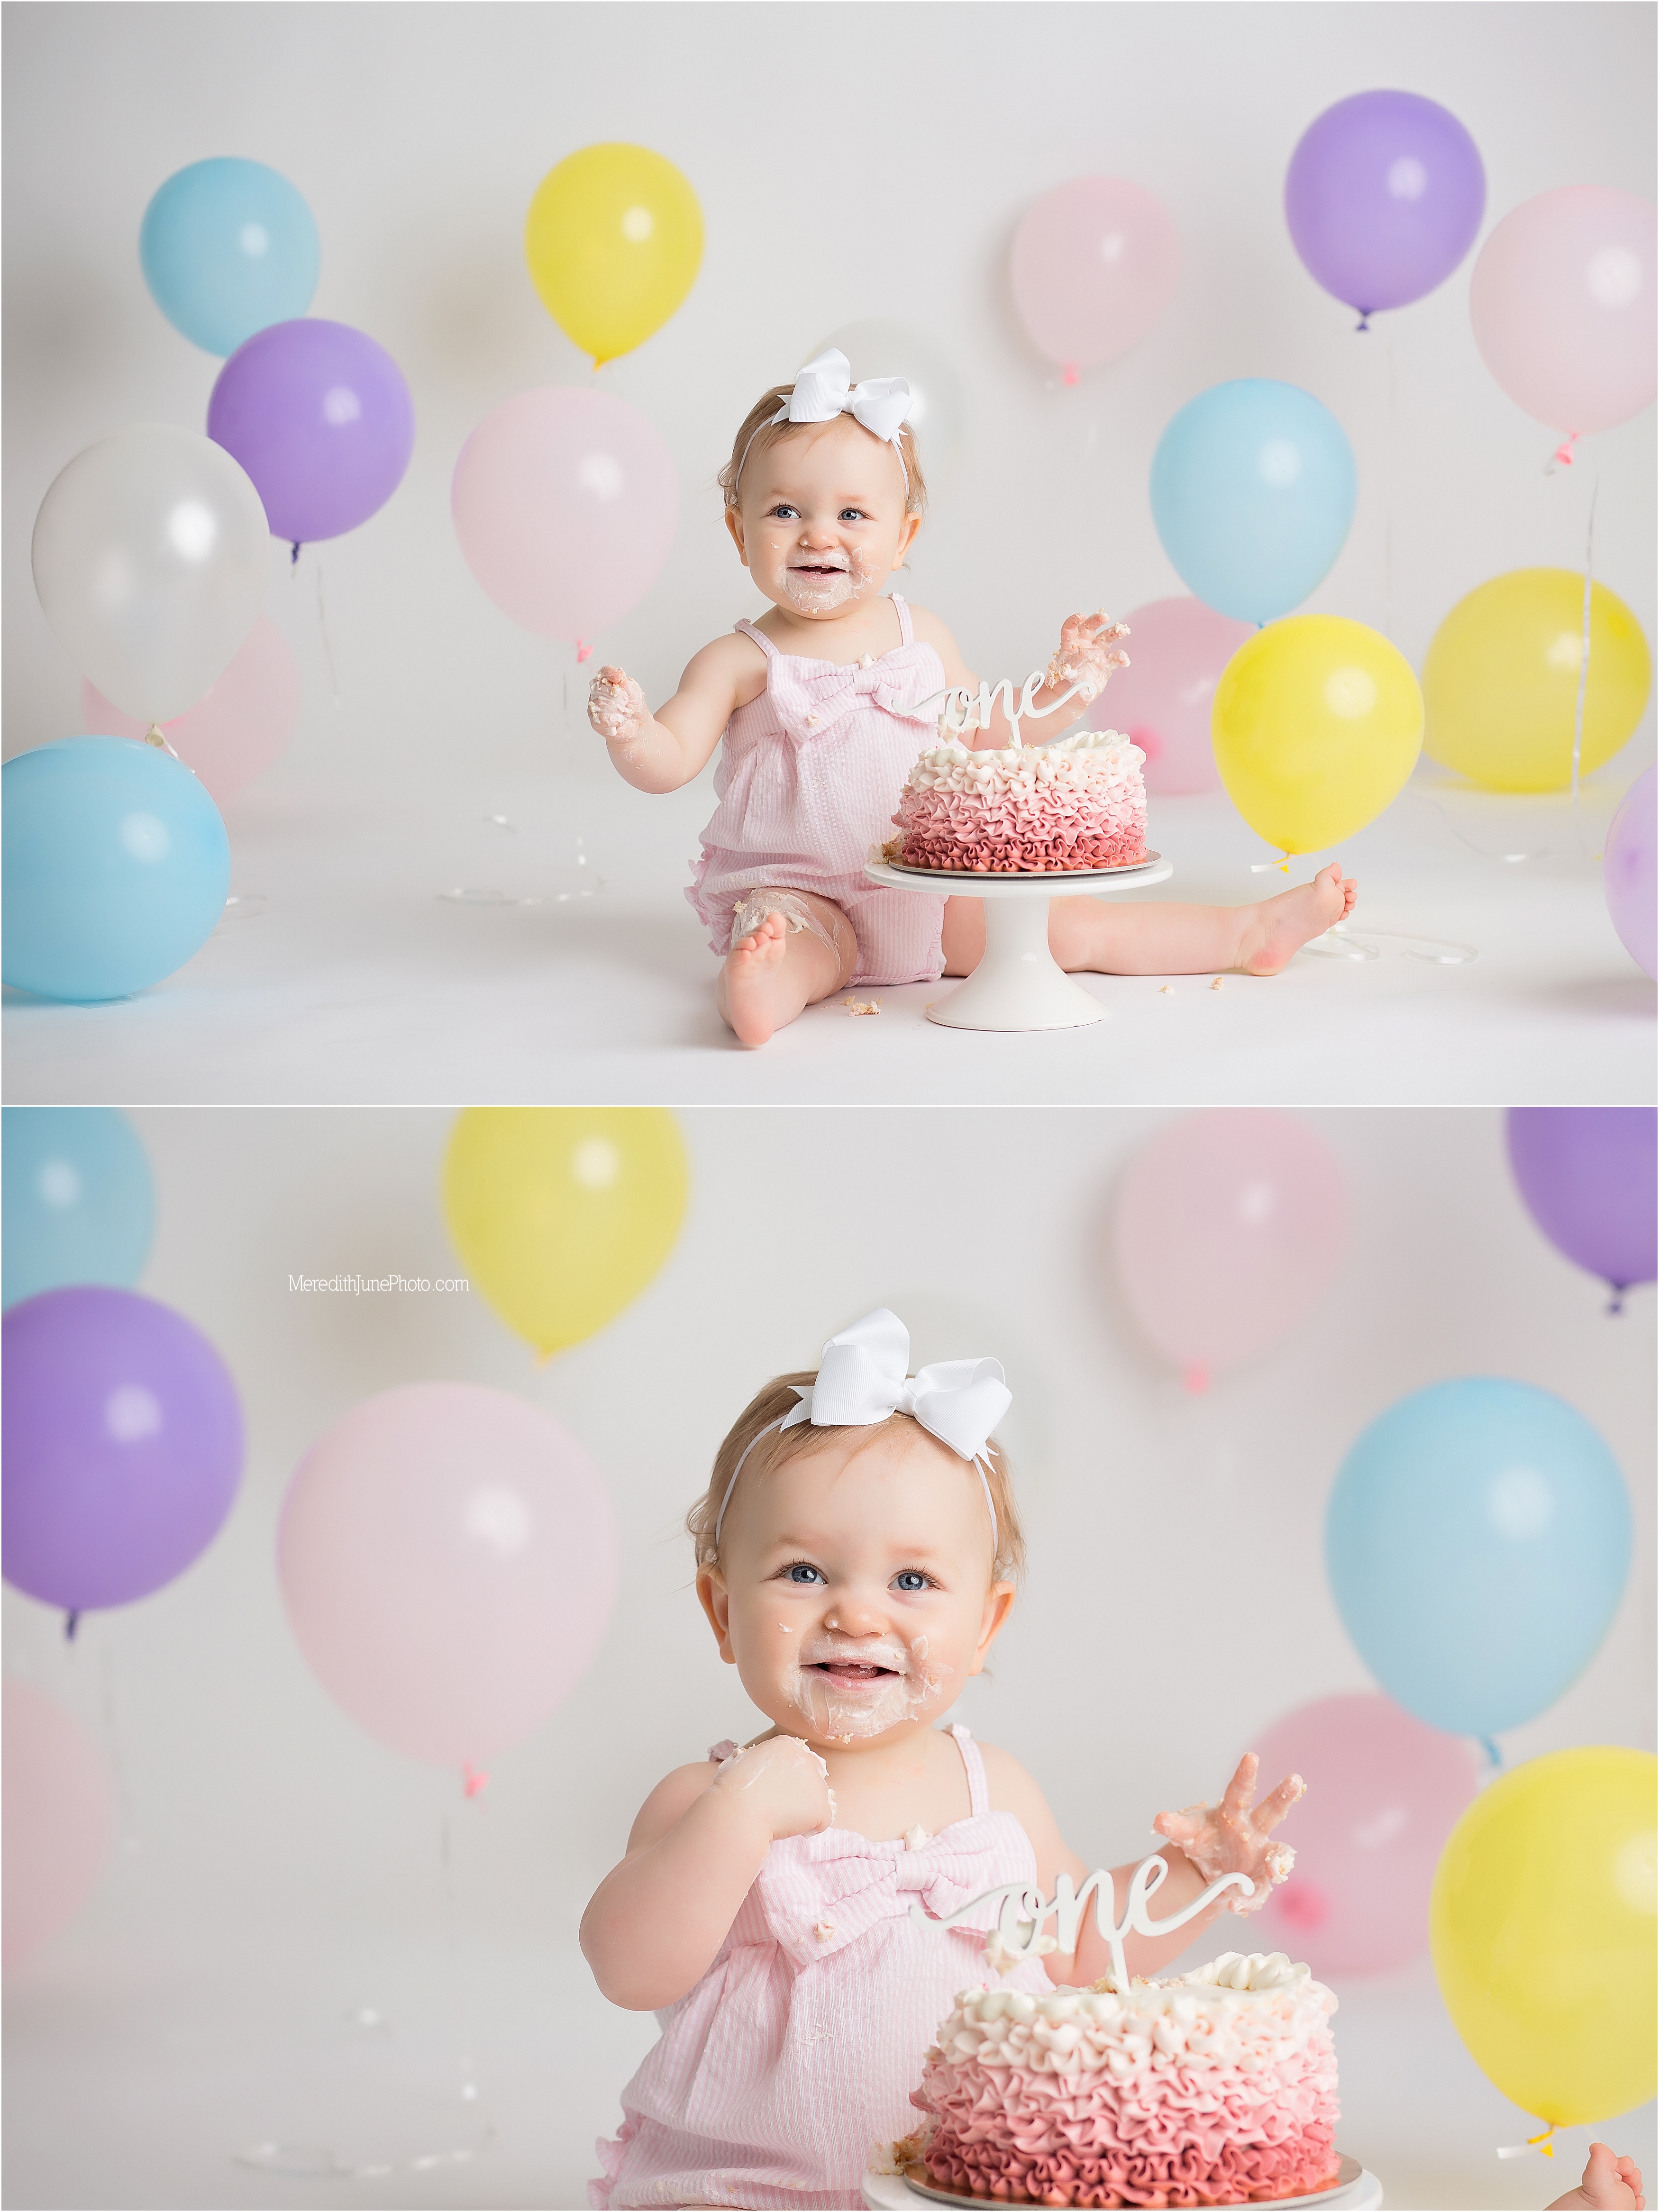 Baby girl cake smash session at Meredith June Photography 